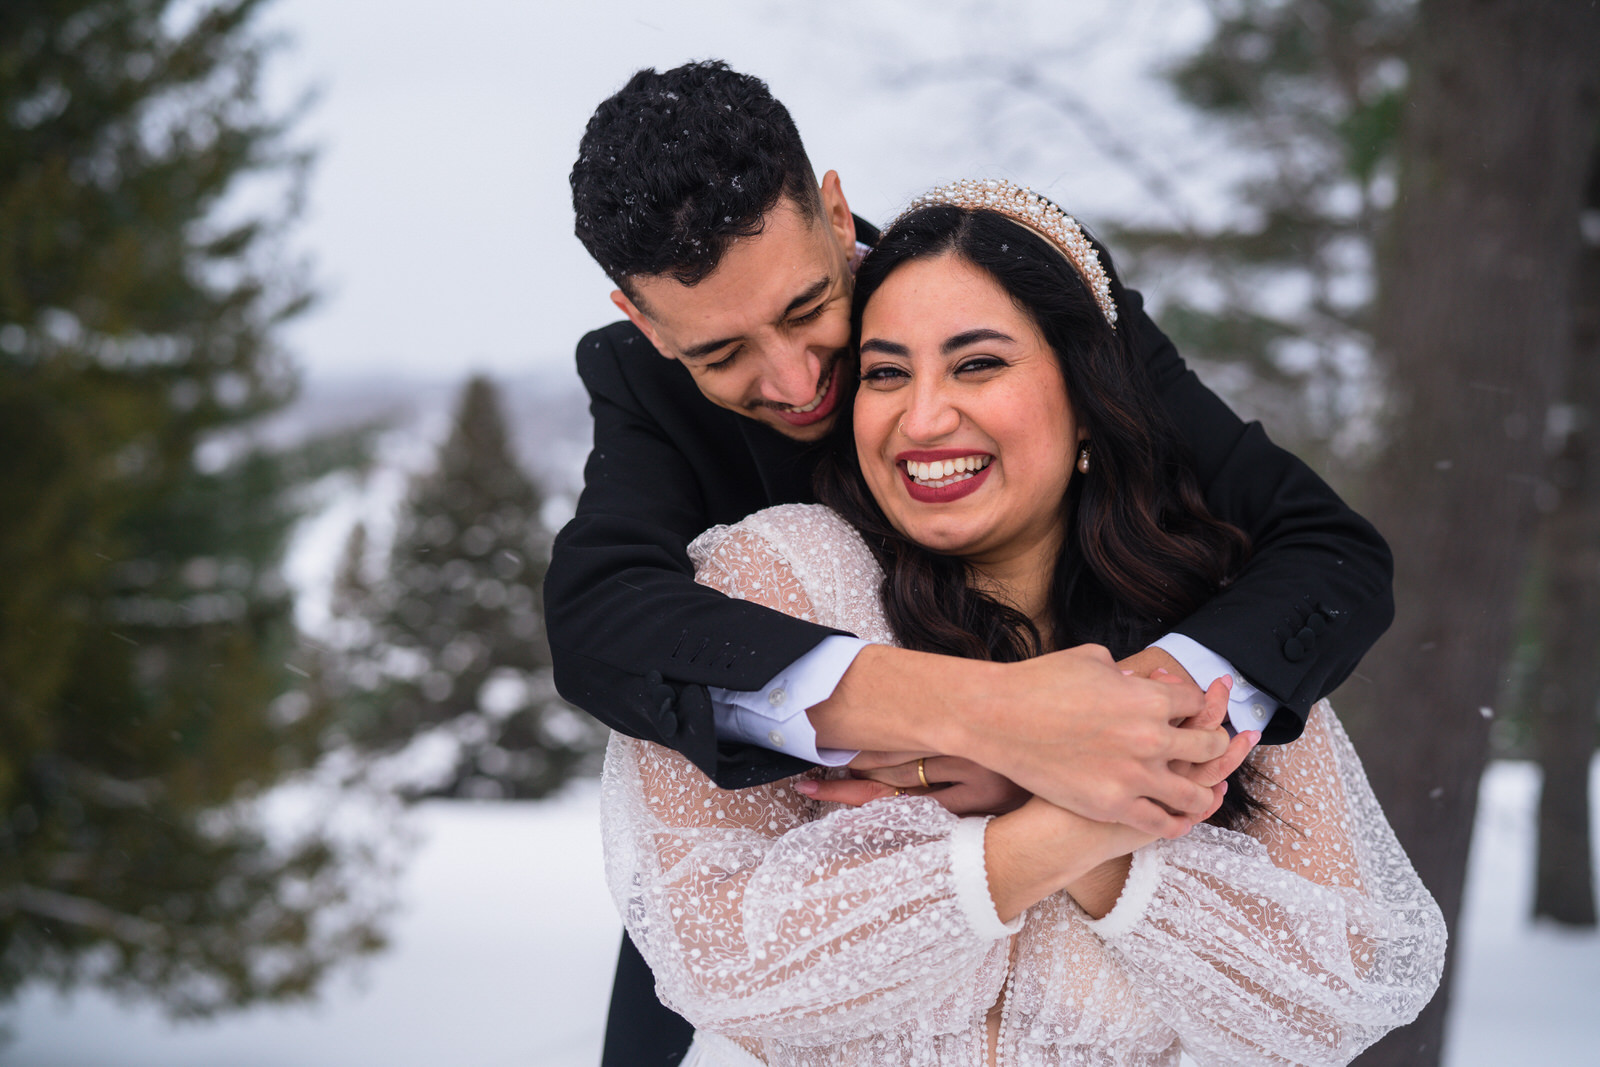 couple hugging each others in the snow. They are smiling and laughing